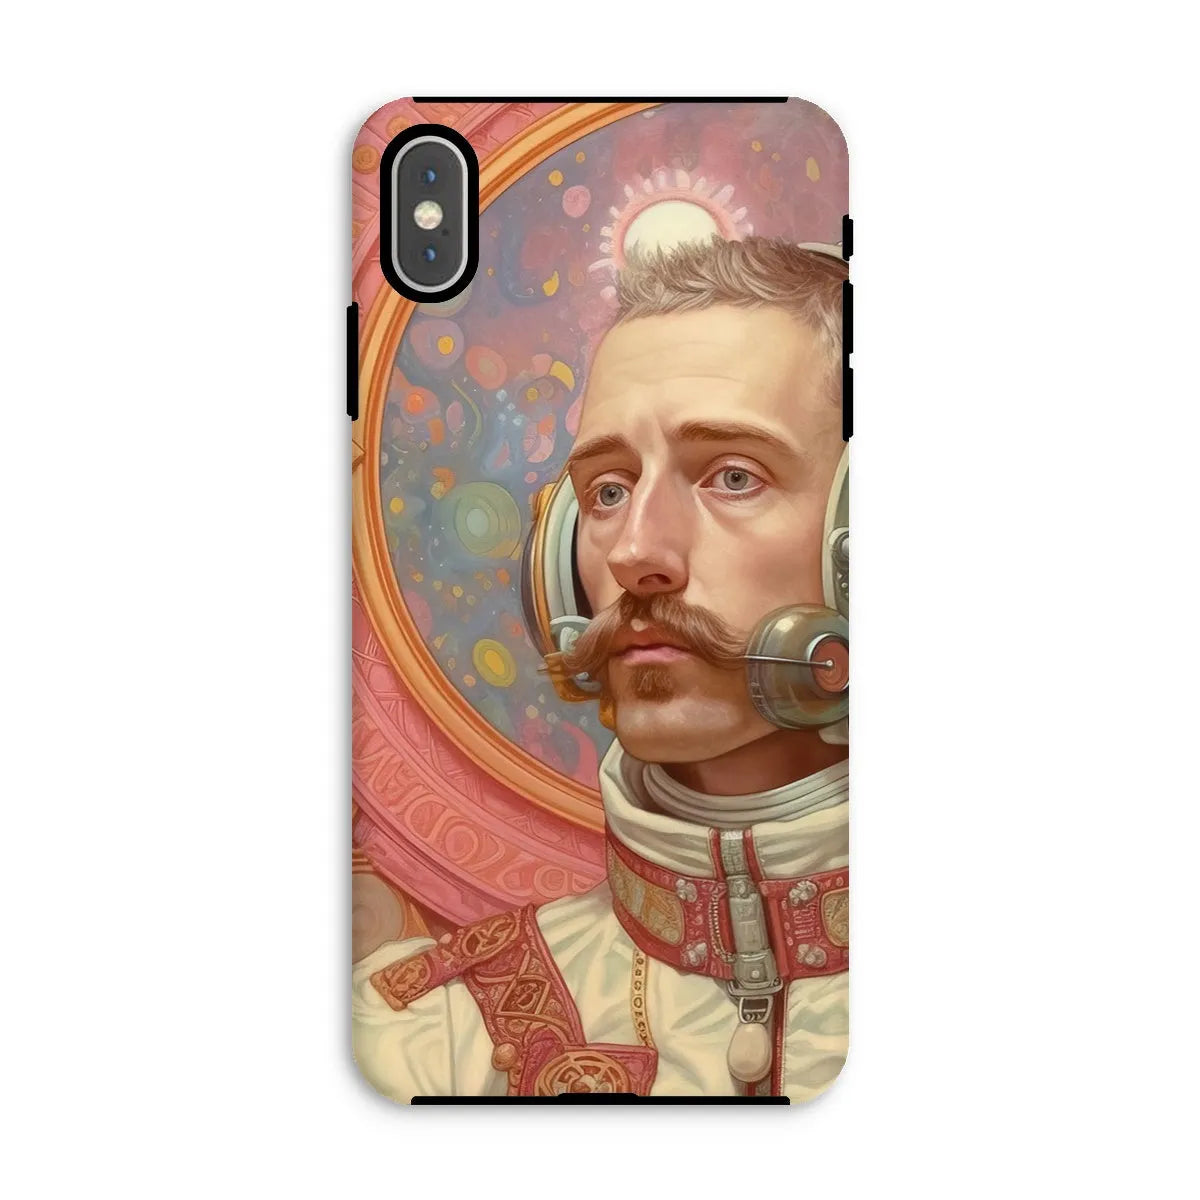 Axel The Gay Astronaut - Gay Aesthetic Art Phone Case - Iphone Xs Max / Matte - Mobile Phone Cases - Aesthetic Art